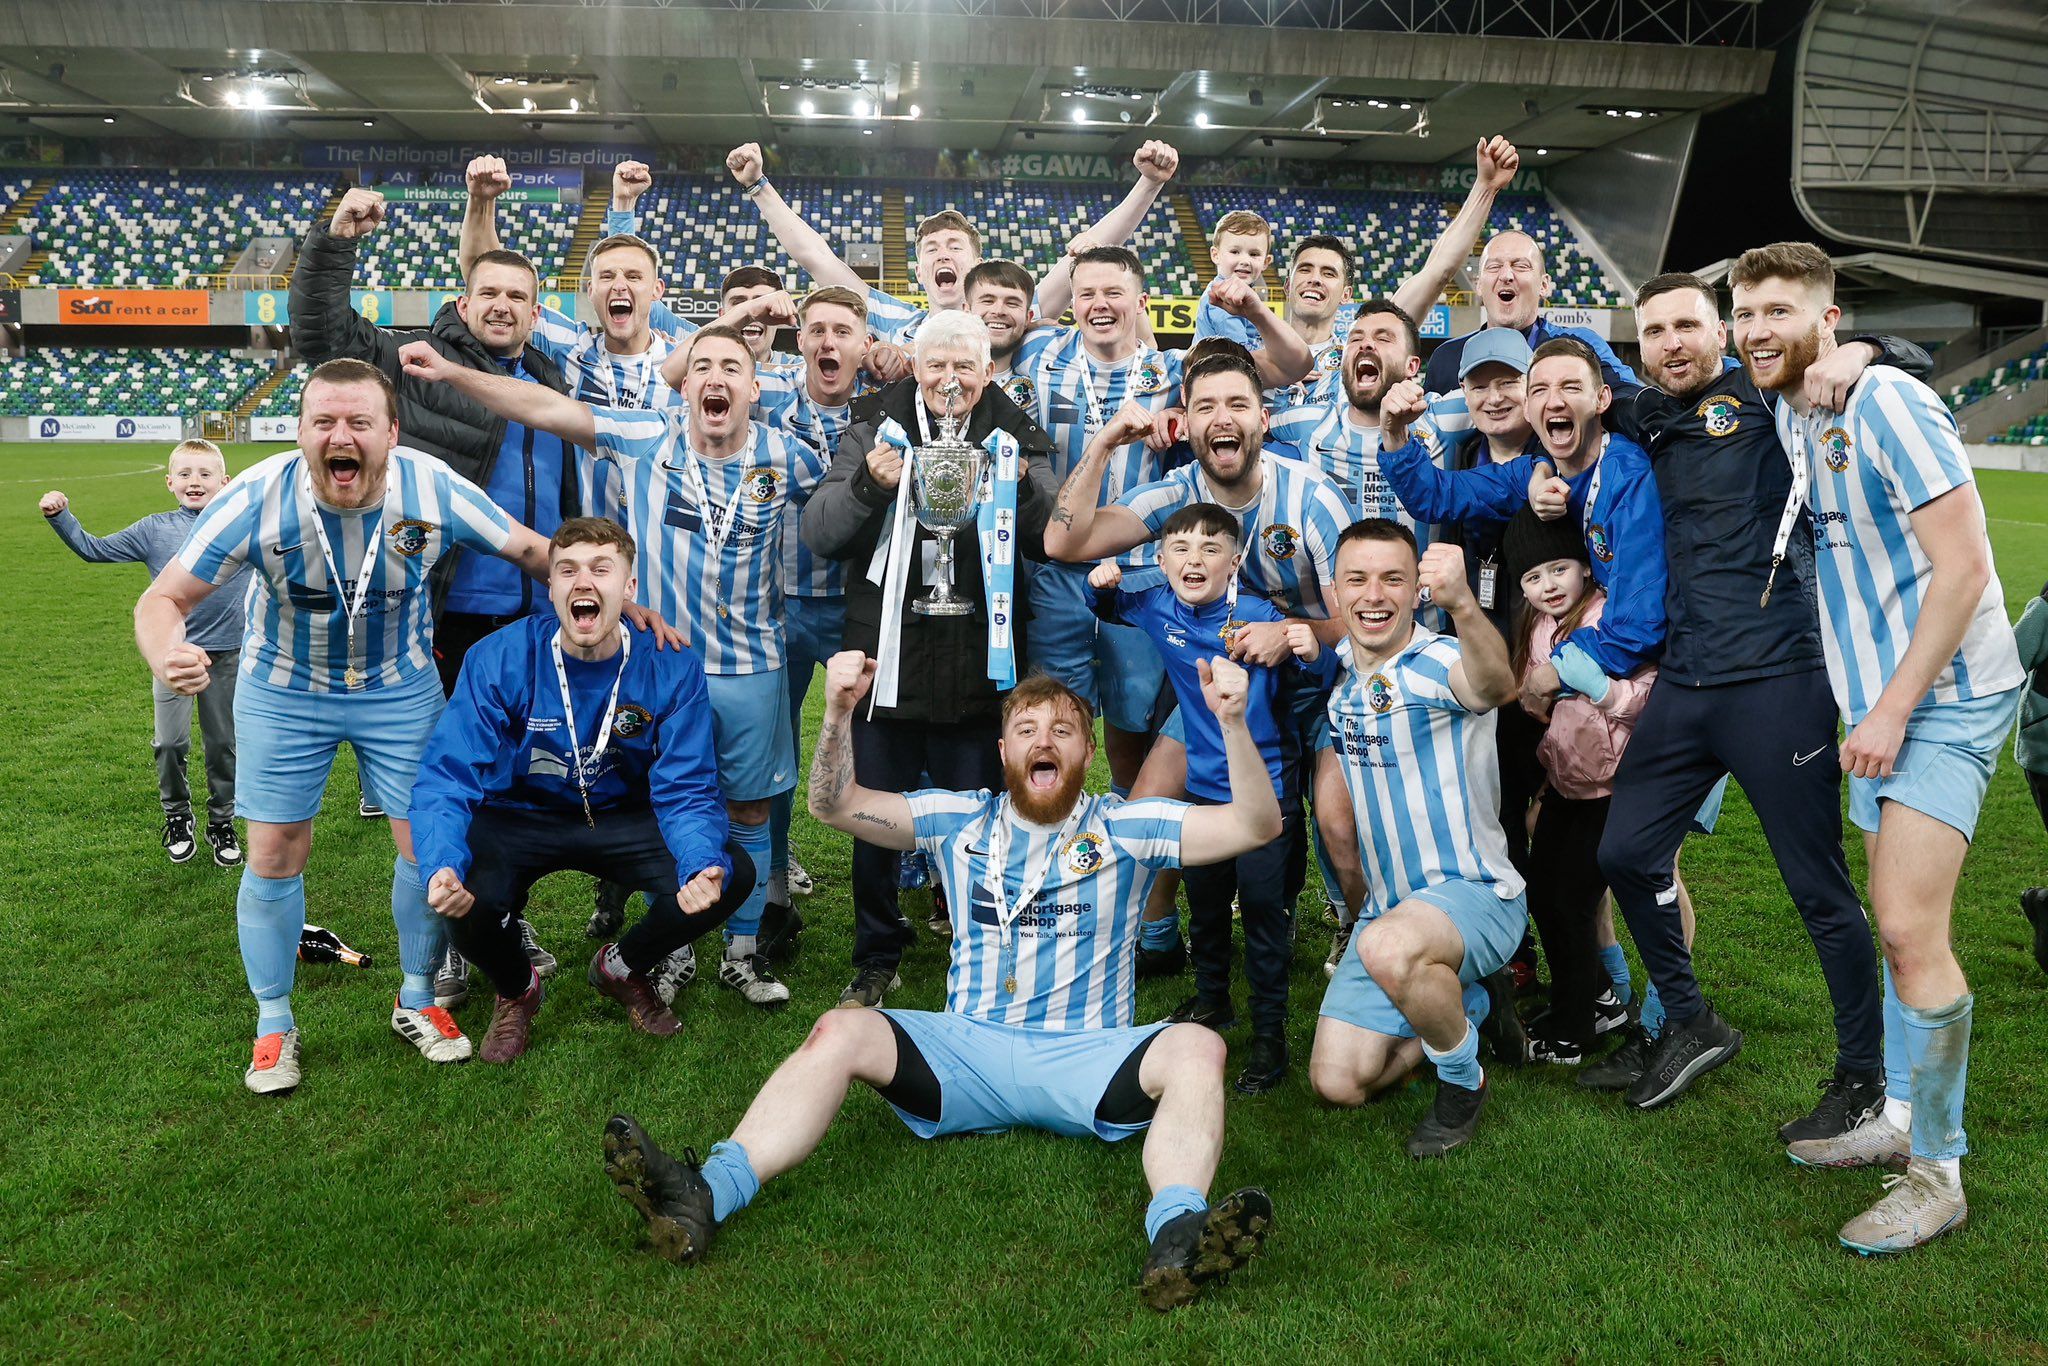 The Immaculata players celebrate their penalty shootout win over Crumlin Star at Windsor Park that landed a first Intermediate Cup success for the club 